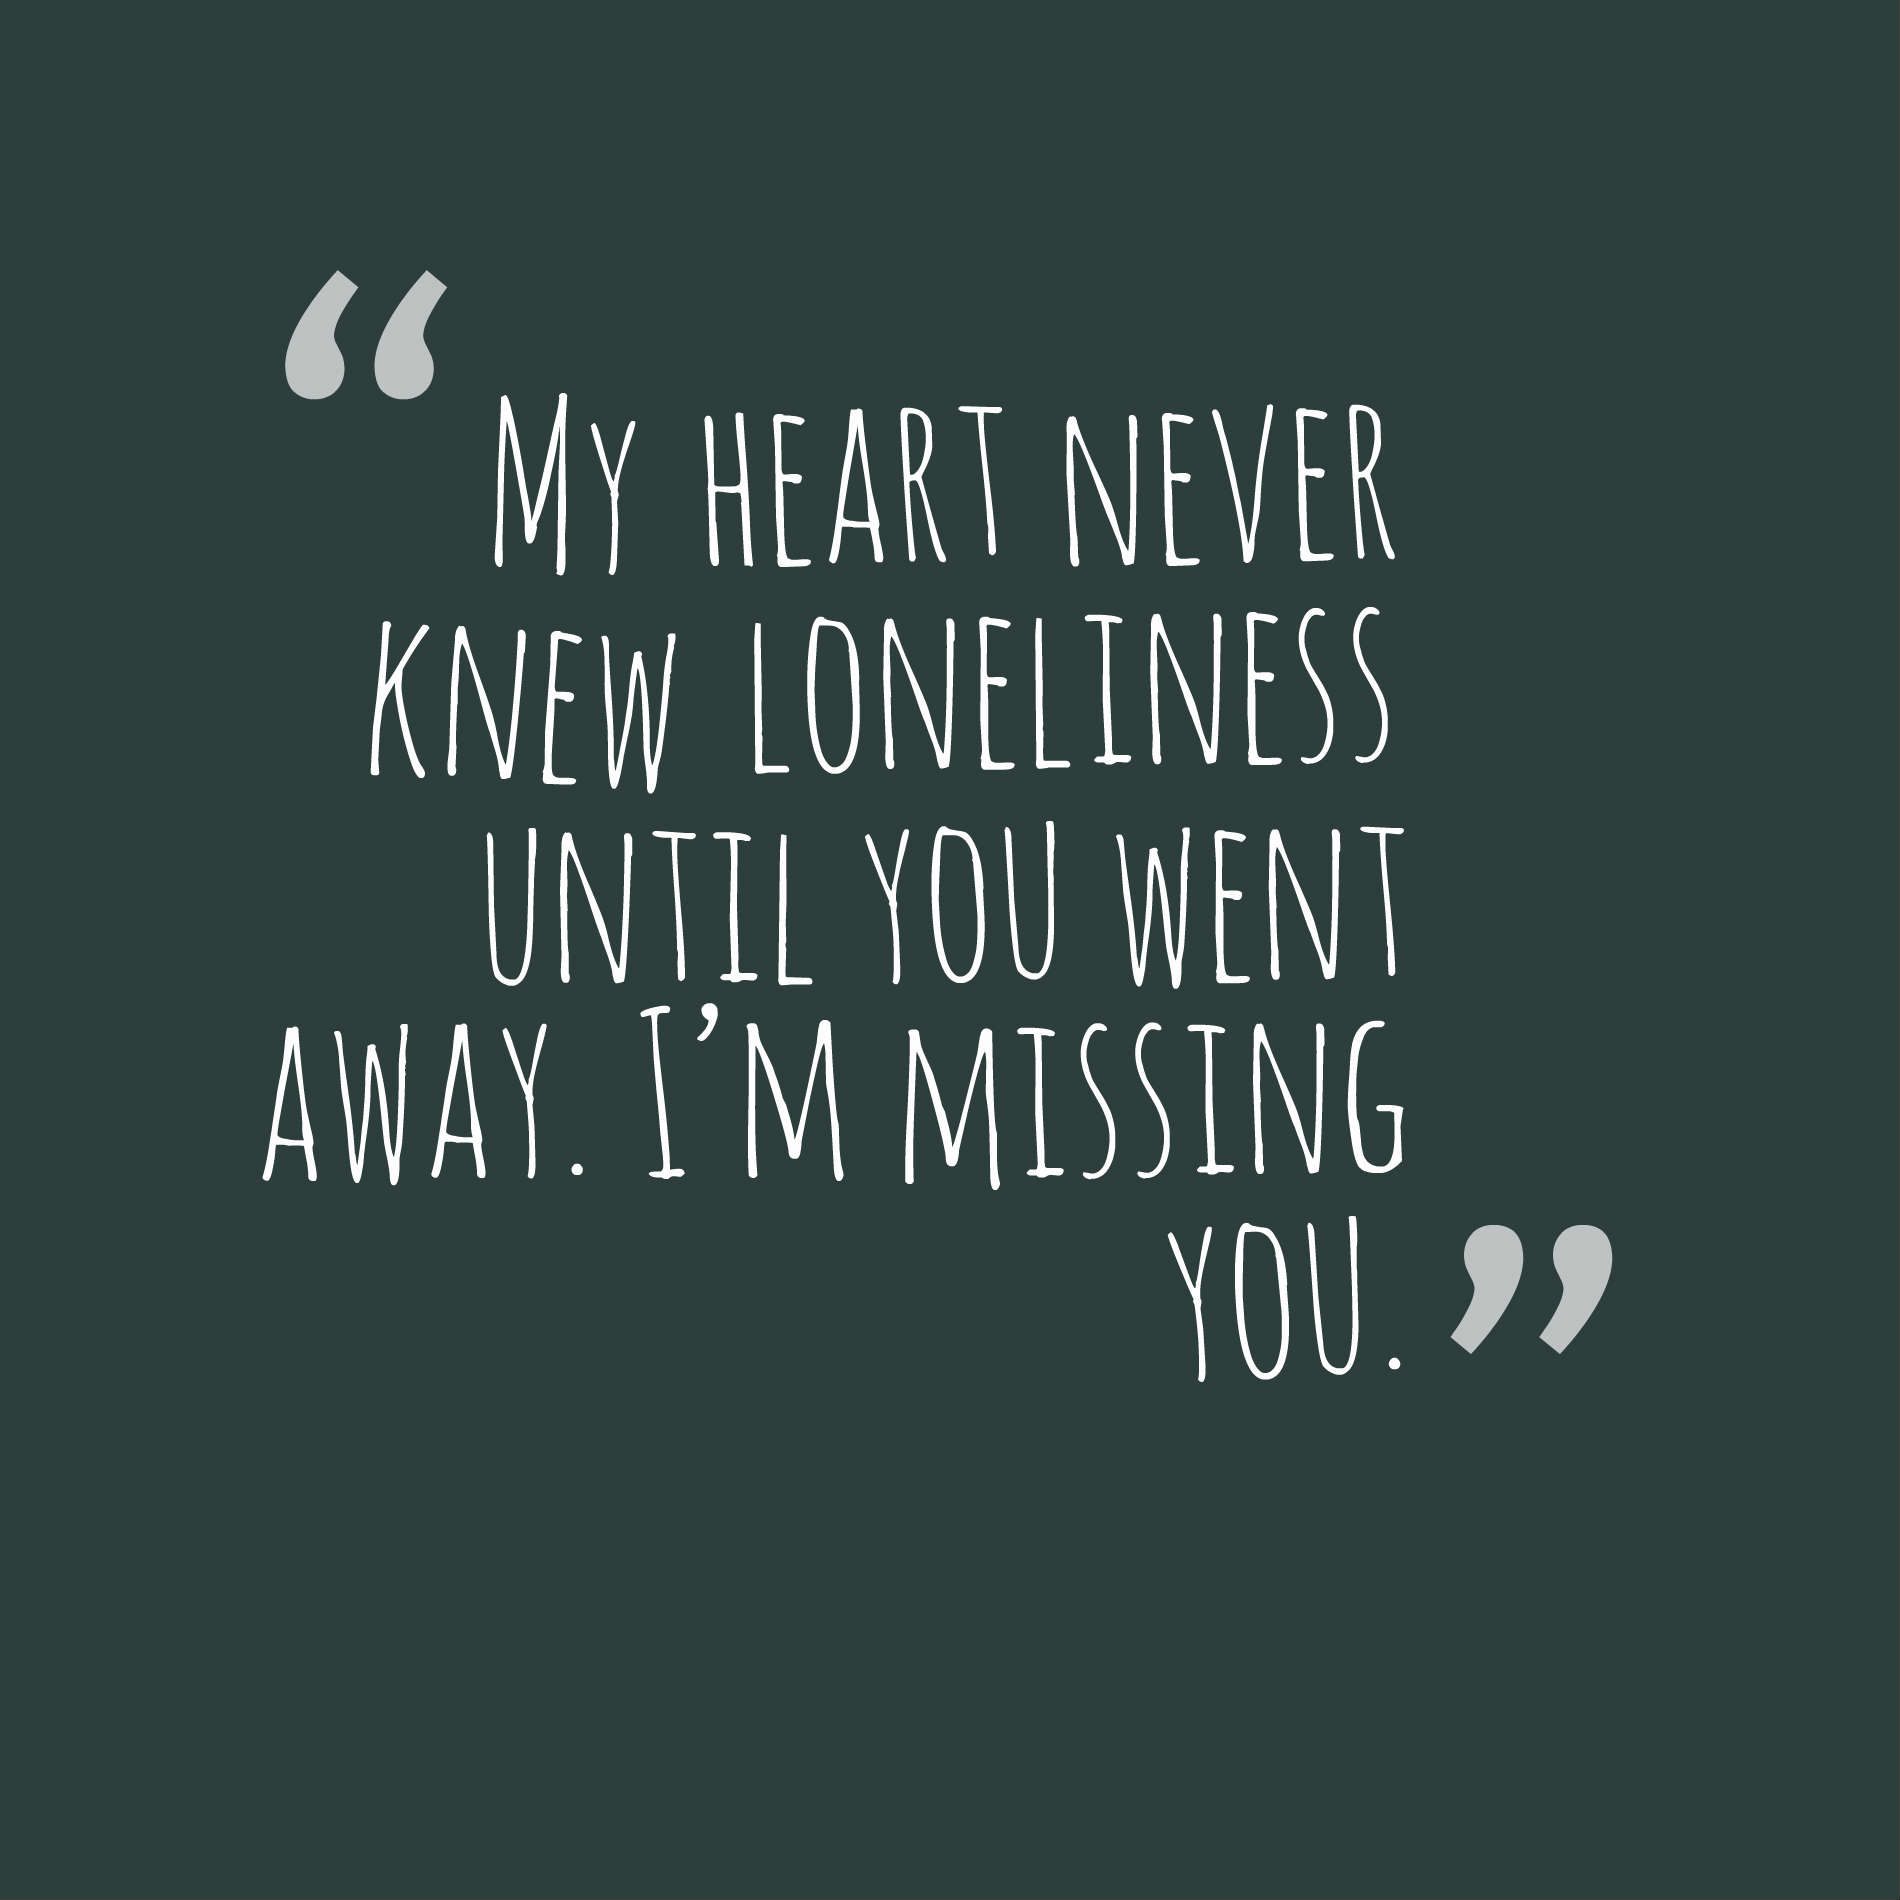 My heart never knew loneliness until you went away. I’m missing you.